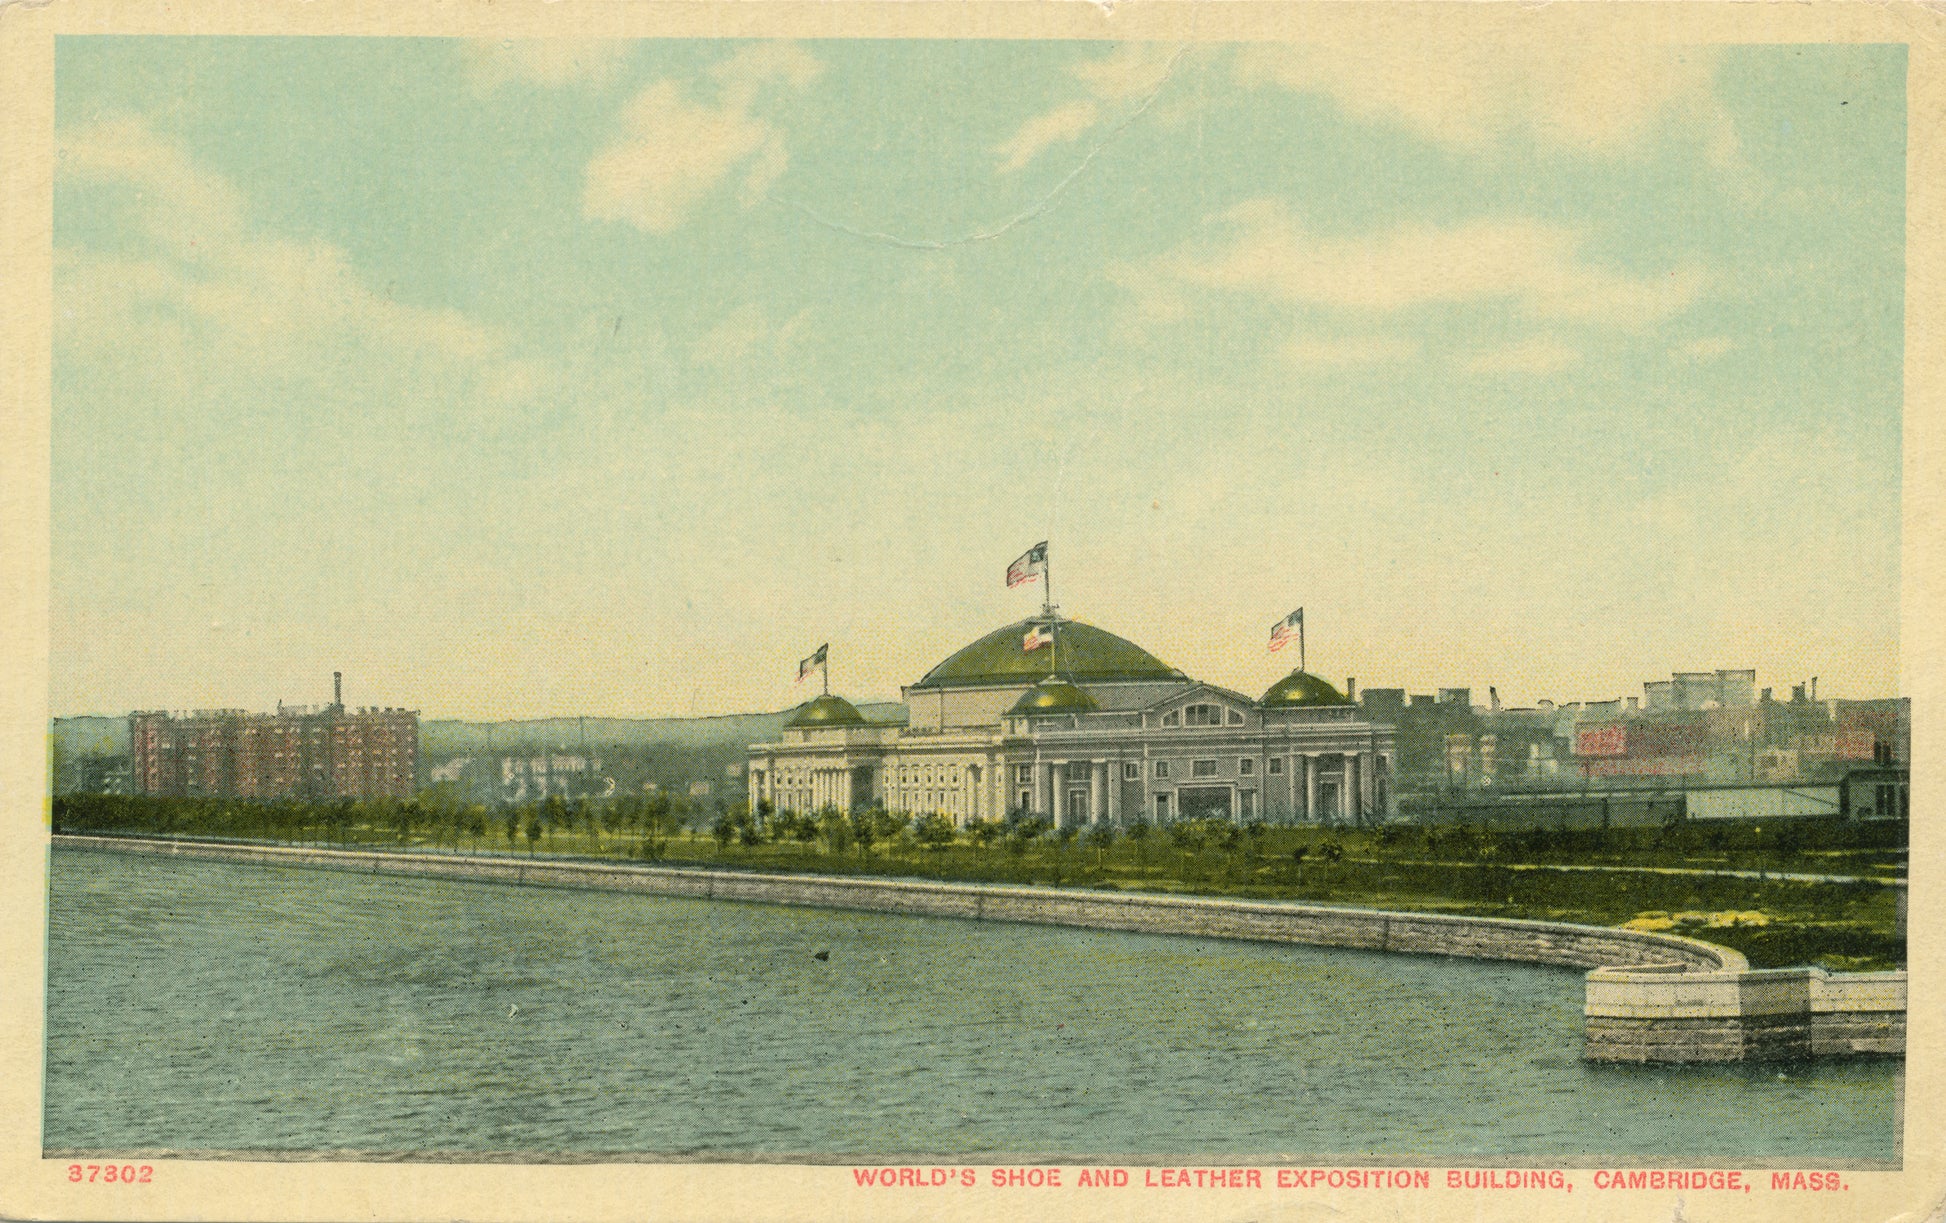 Vintage Postcard: World's Shoe and Leather Exposition Building in Cambridge